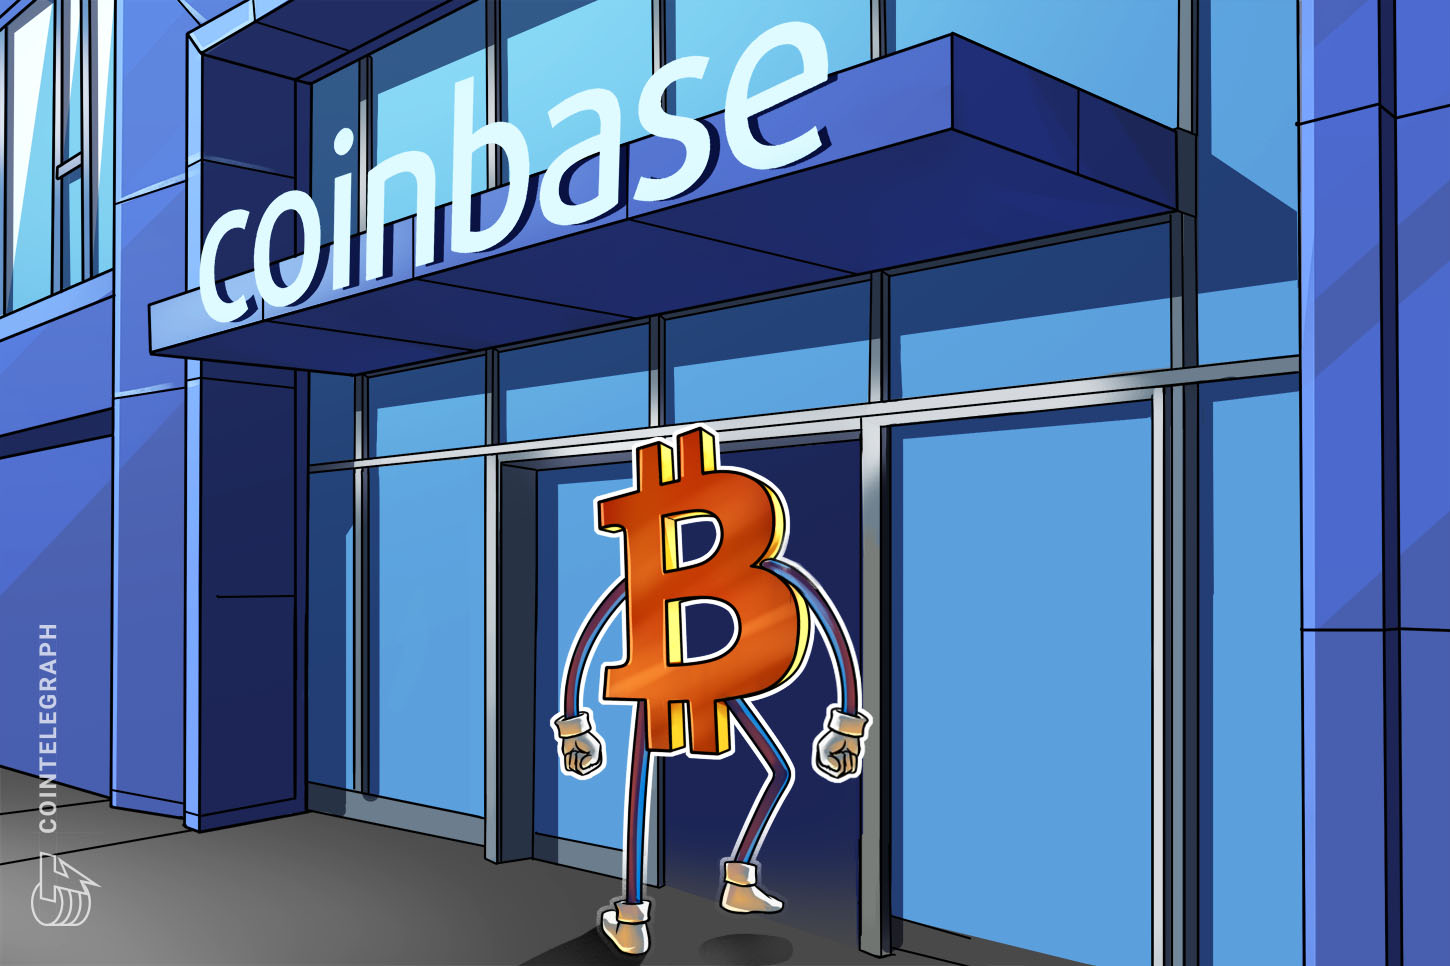 Coinbase executed MicroStrategy’s $425M Bitcoin buy in September 2020